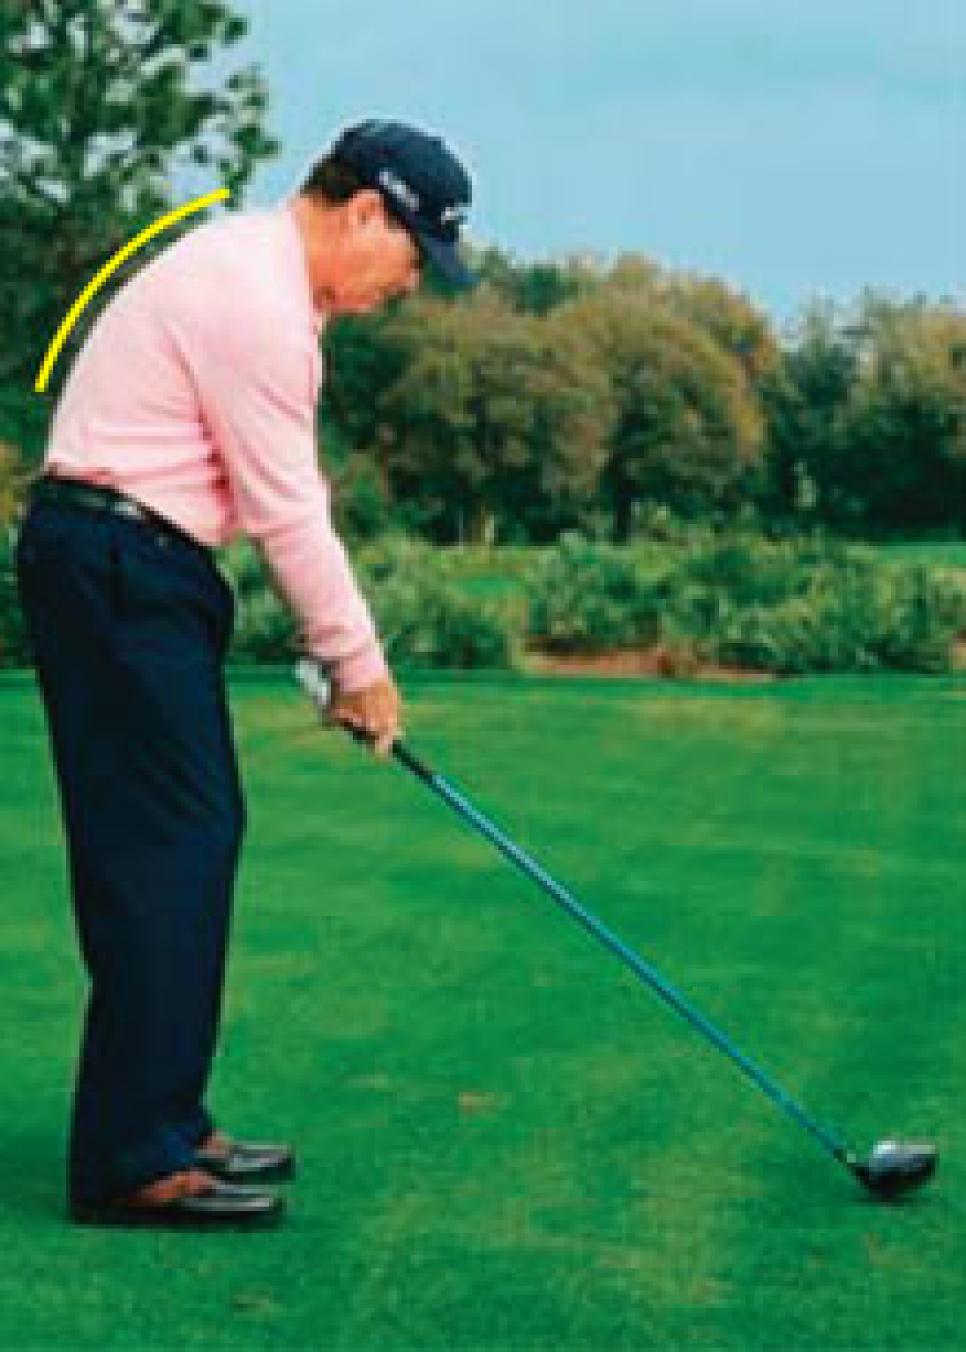 Why standing tall over the ball is so important | How To | Golf Digest